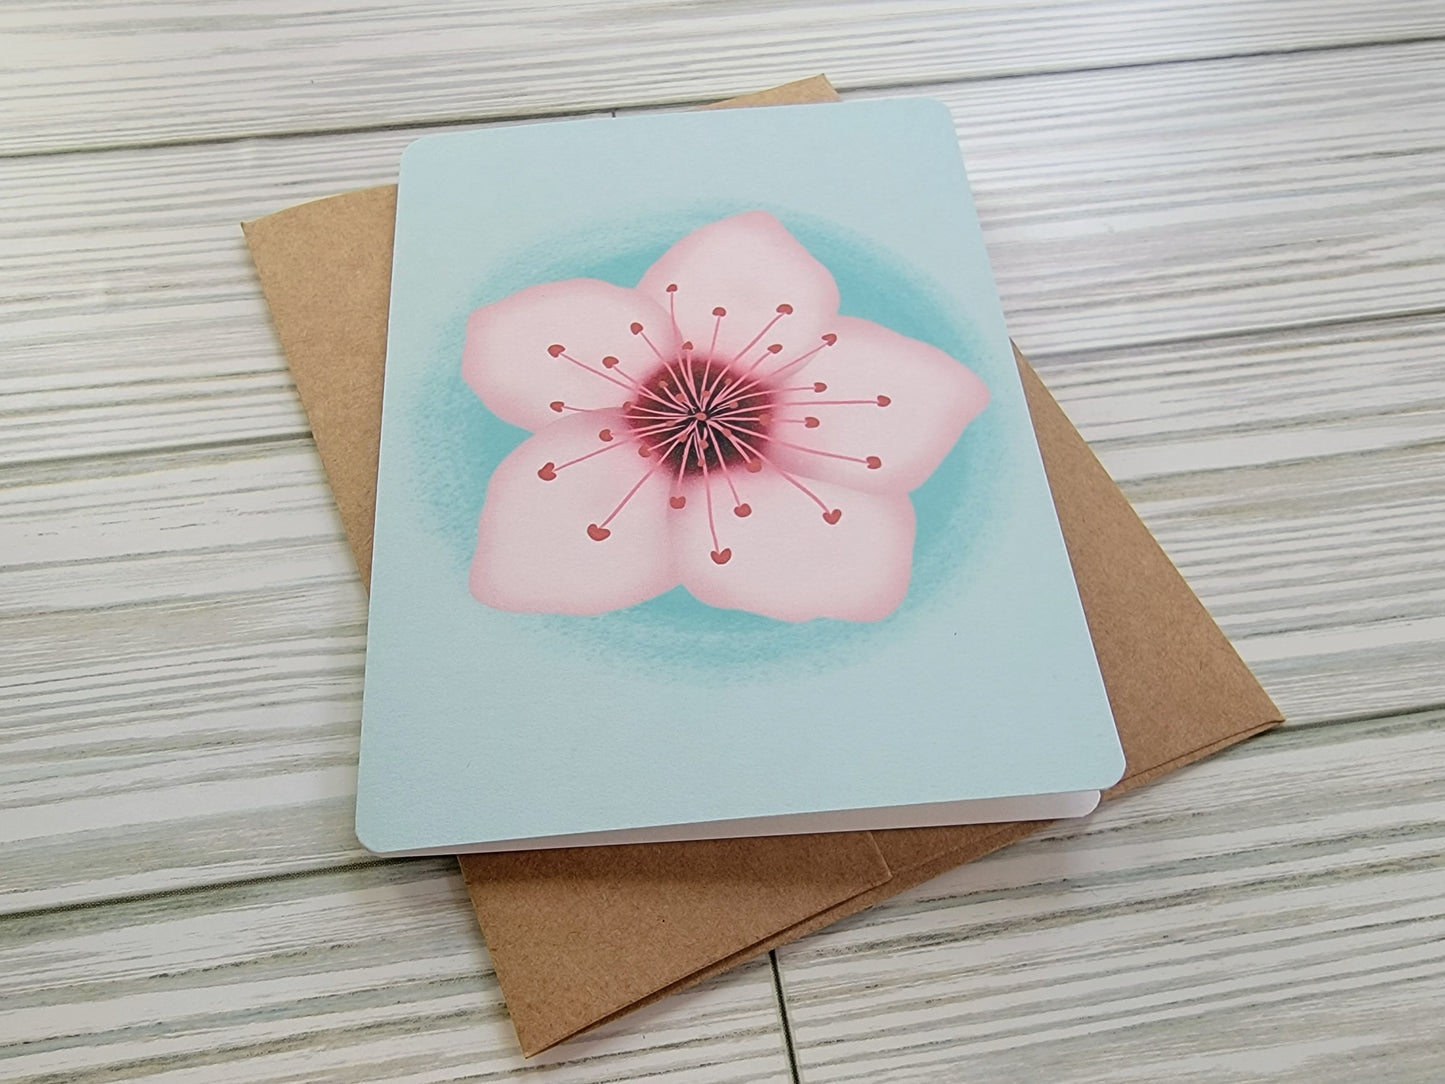 Cherry Blossom Handmade Greeting Card - Recycled Paper and Kraft Envelope - Angled Shot